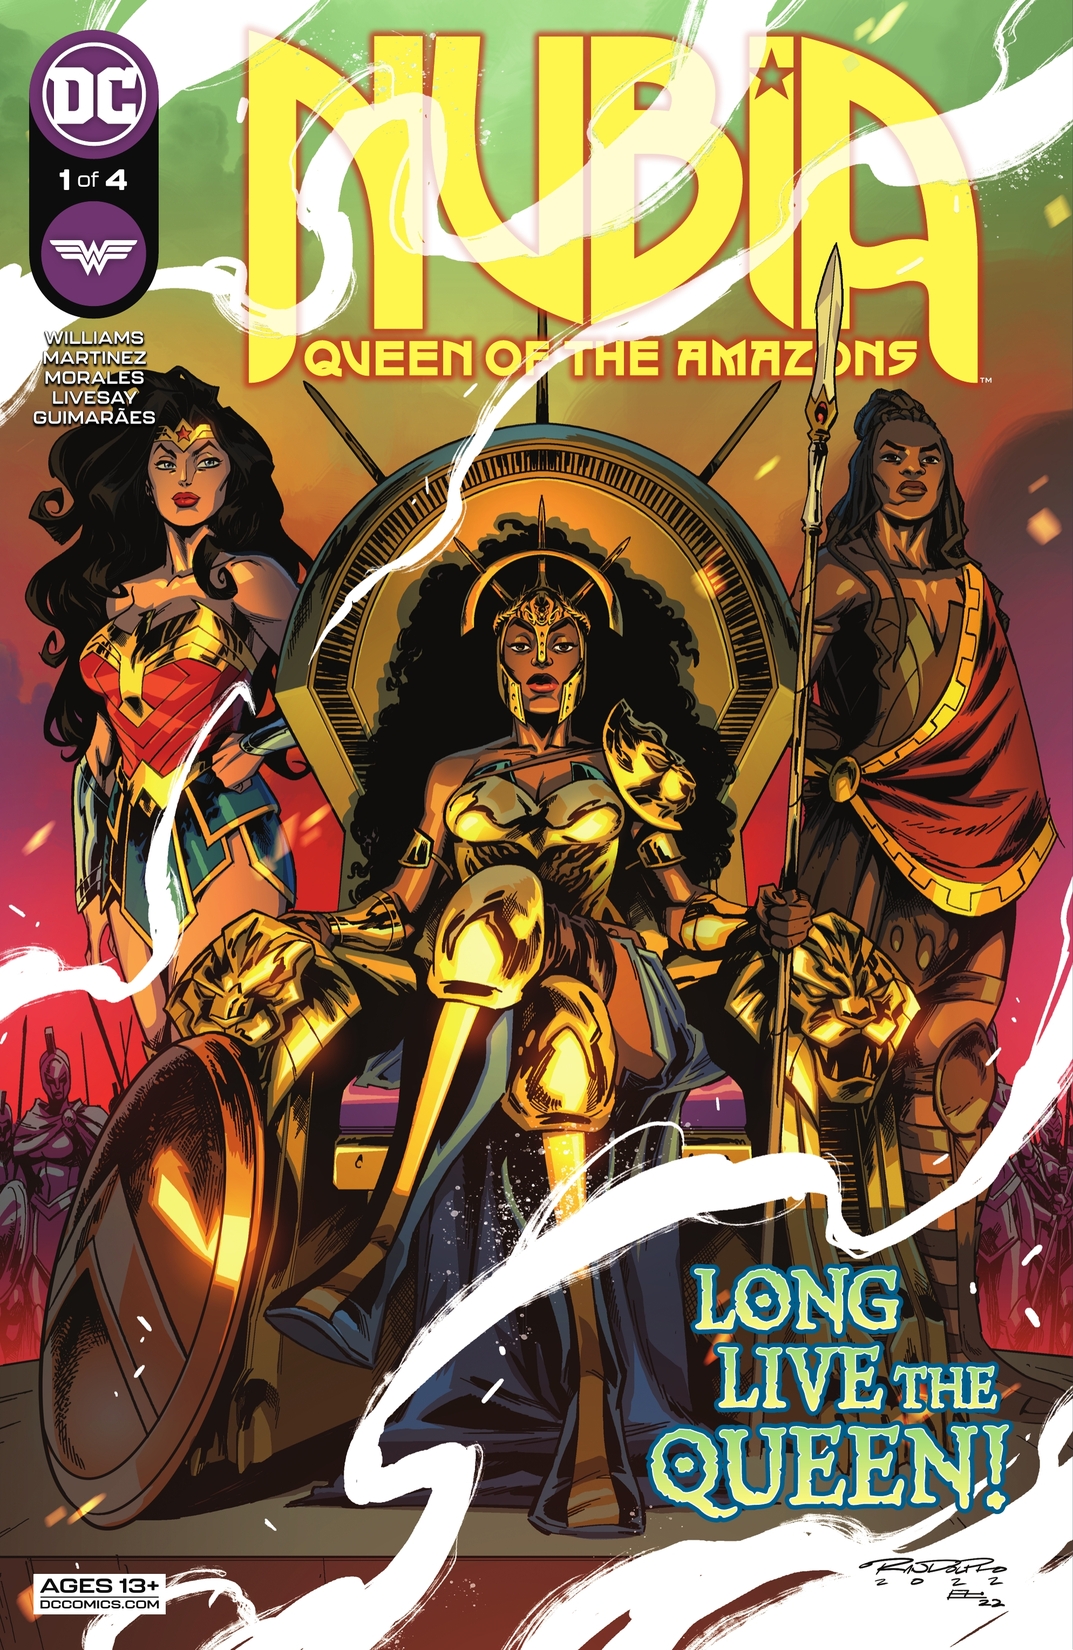 Nubia: Queen of the Amazons #1 preview images